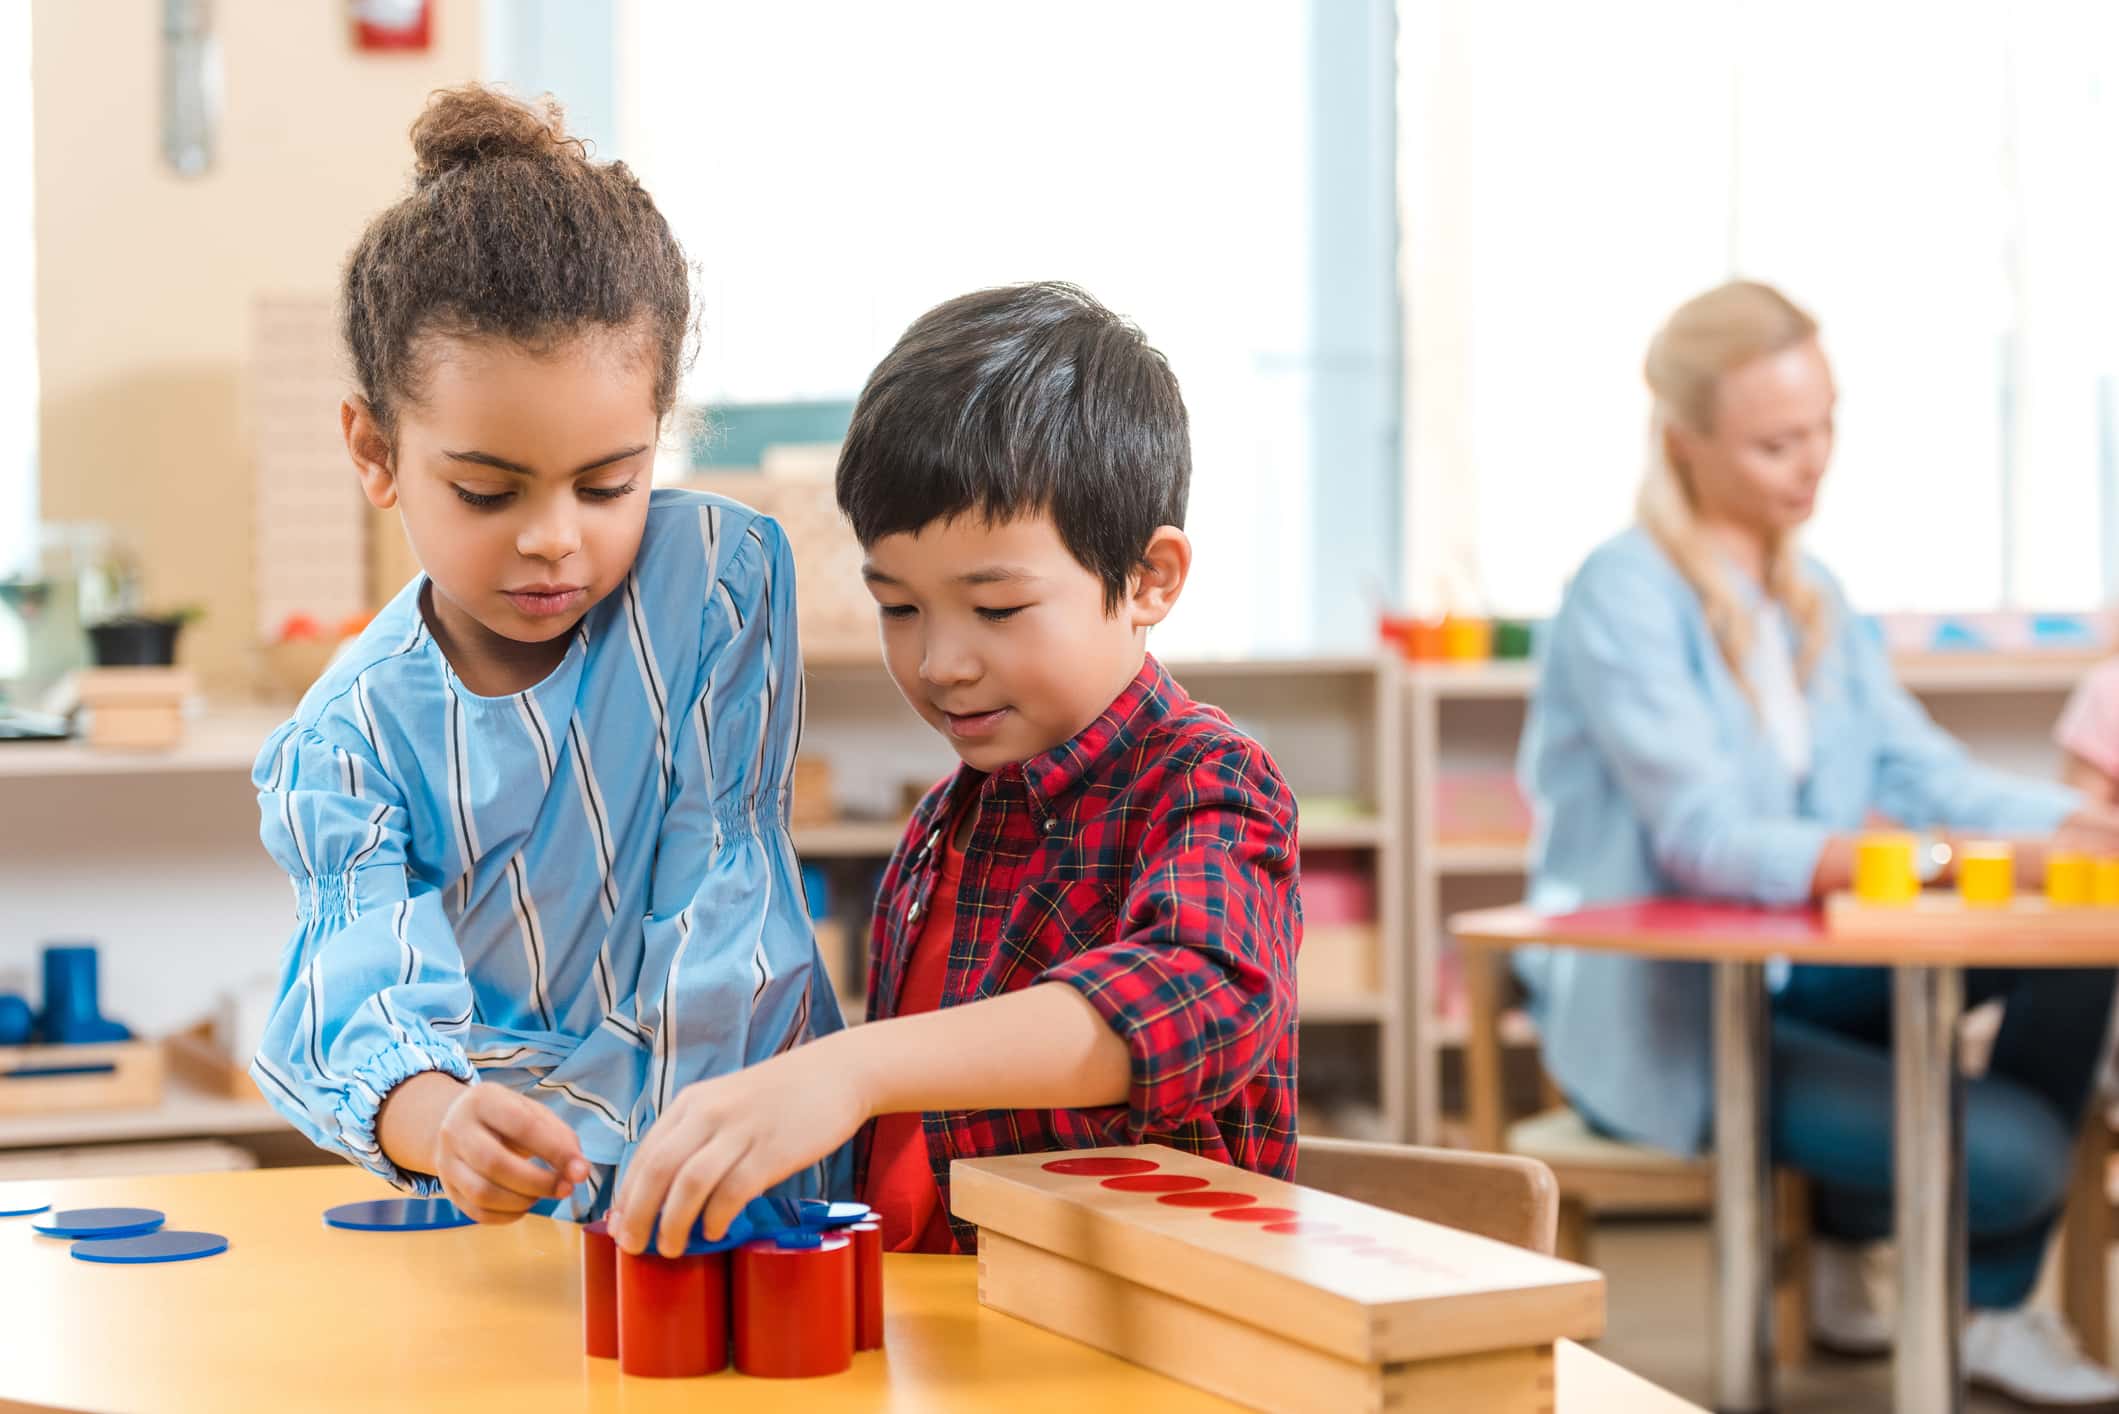 The 11 Most Important Social Skills To Teach Kids